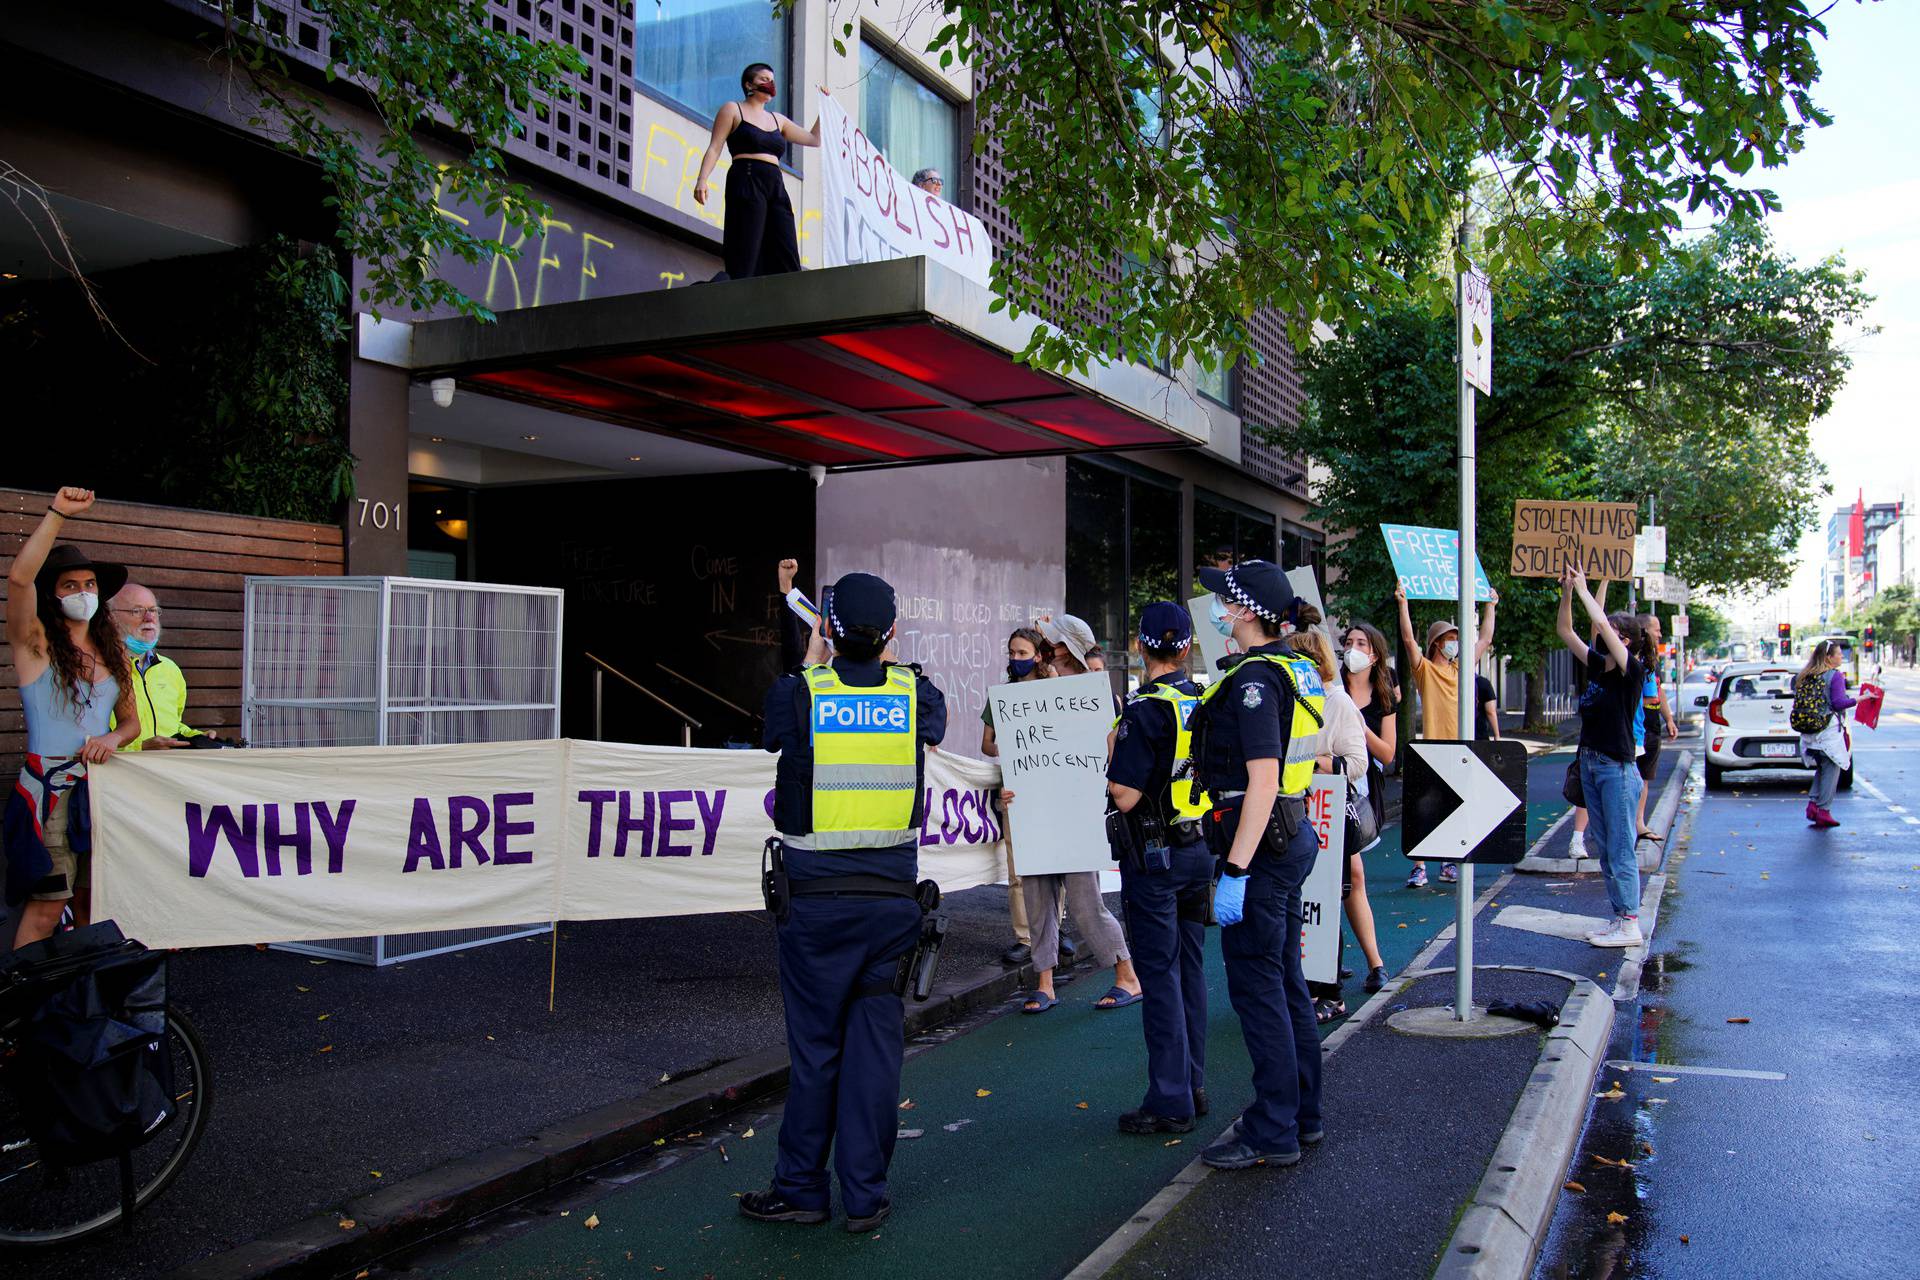 Pro-refugee protestors demonstrate at the Park Hotel, where Serbian tennis player Novak Djokovic is believed to be held, in Melbourne